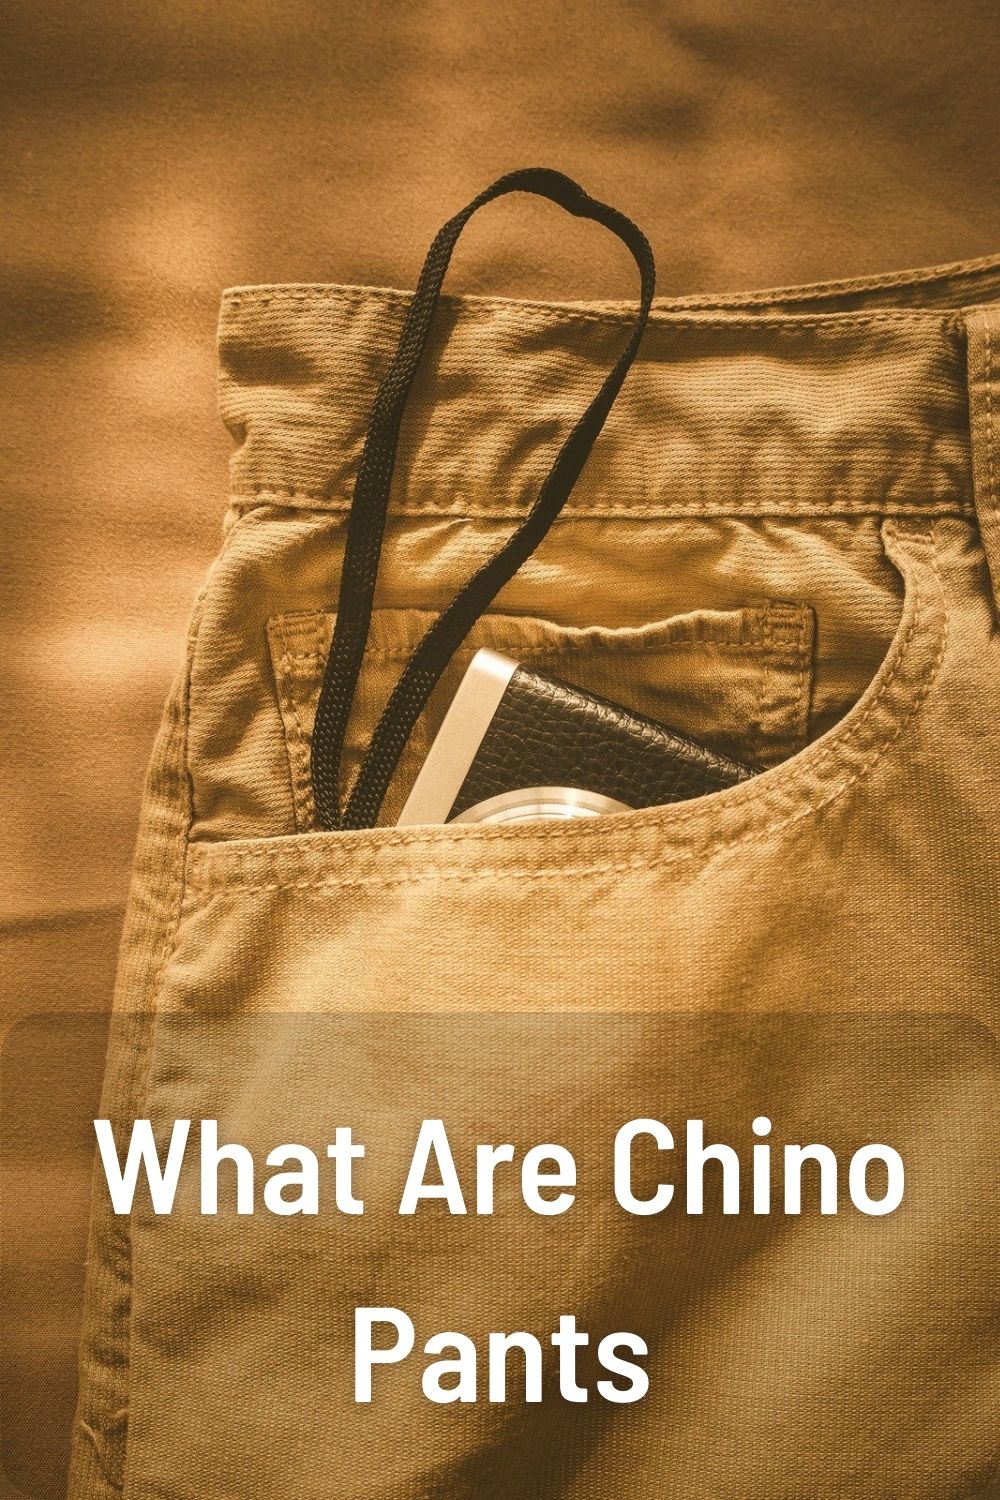 What Are Chino Pants